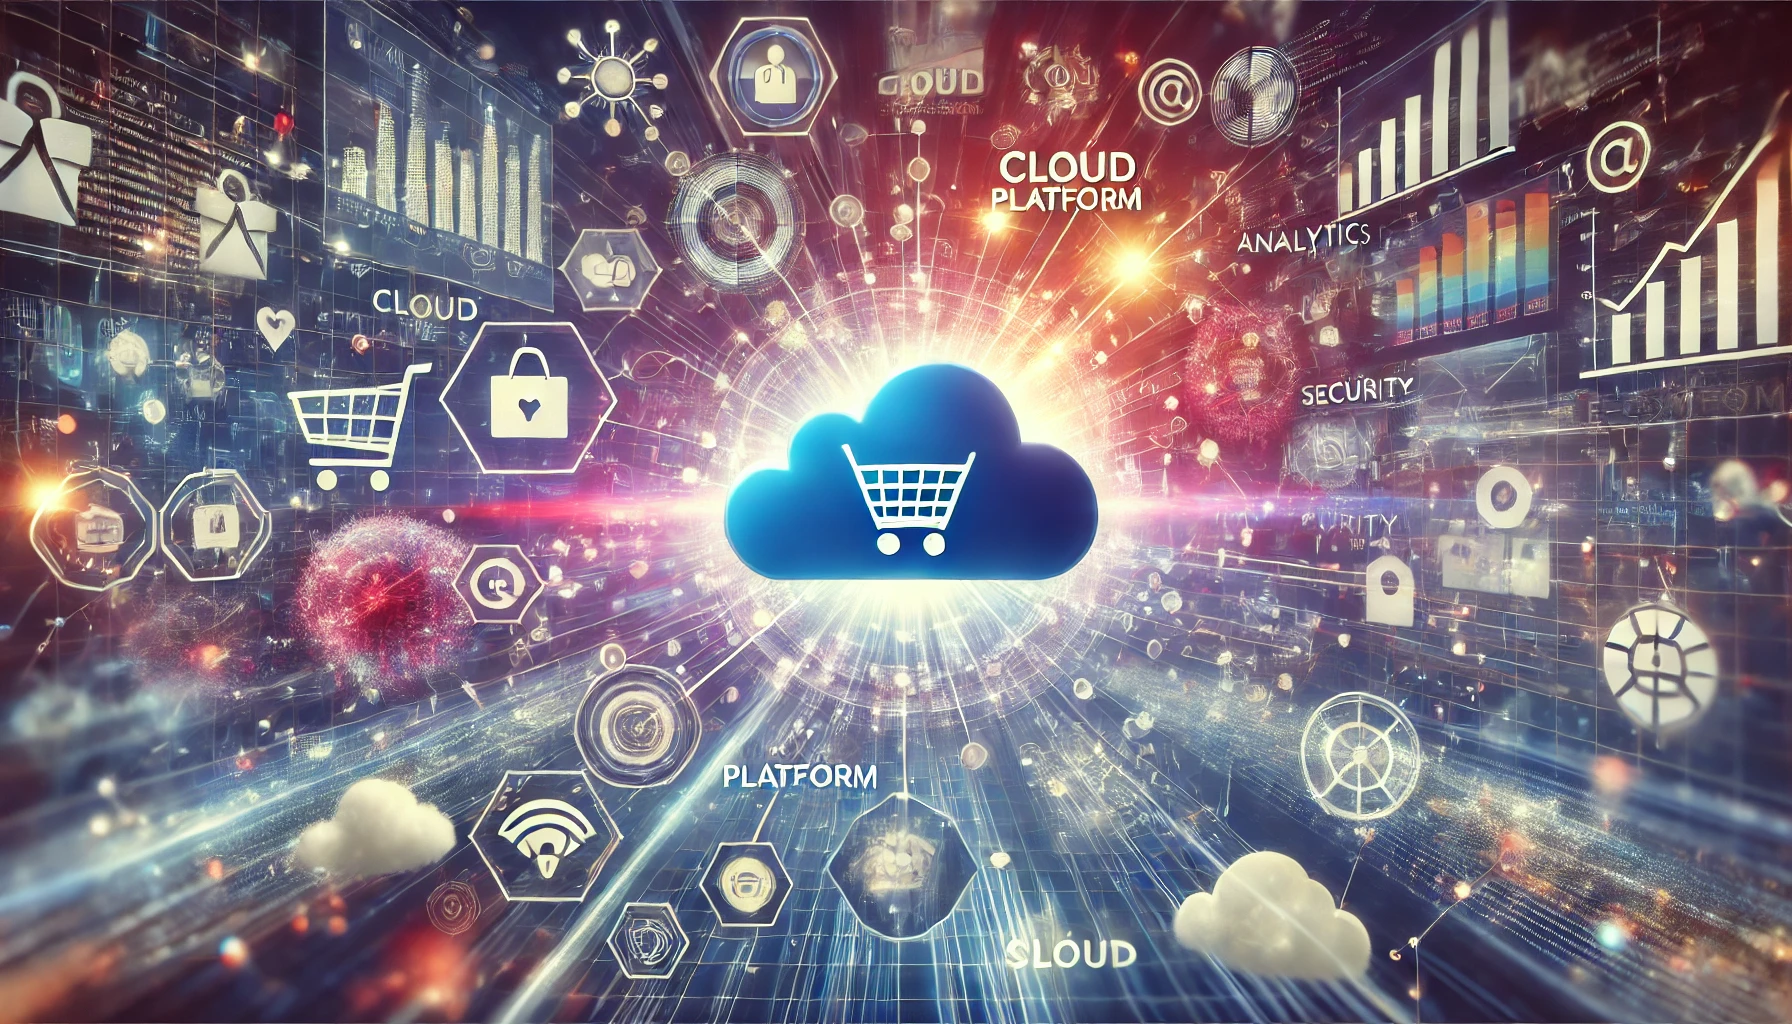 Shop on Cloud X 3: E-commerce with Cutting-Edge Technology